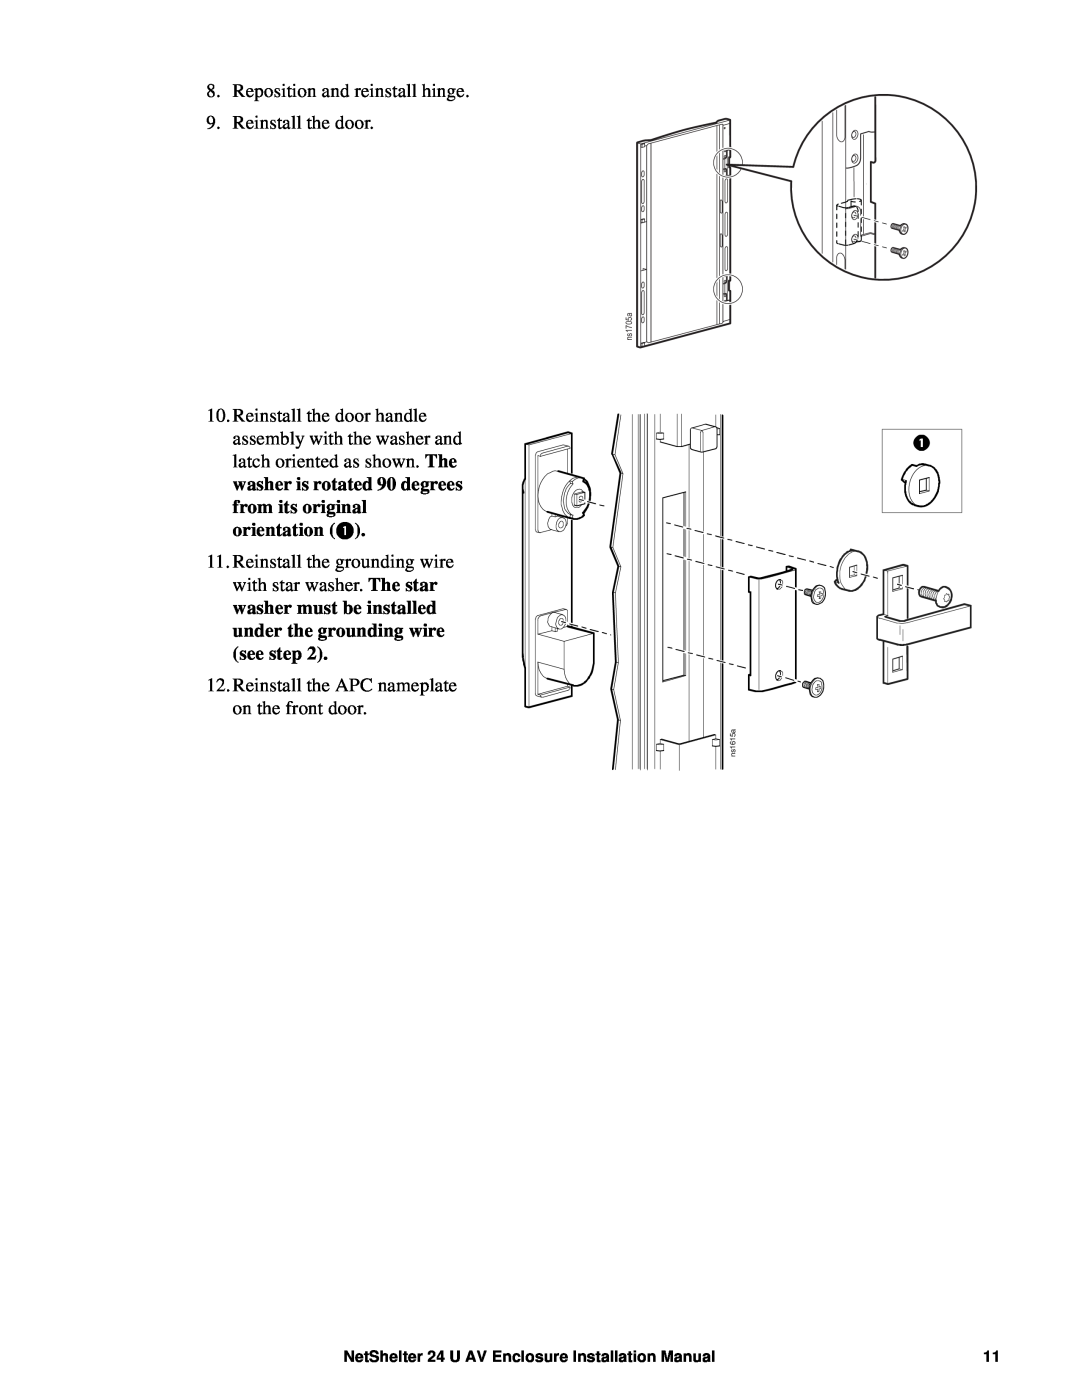 APC AR3814 installation manual Reposition and reinstall hinge 